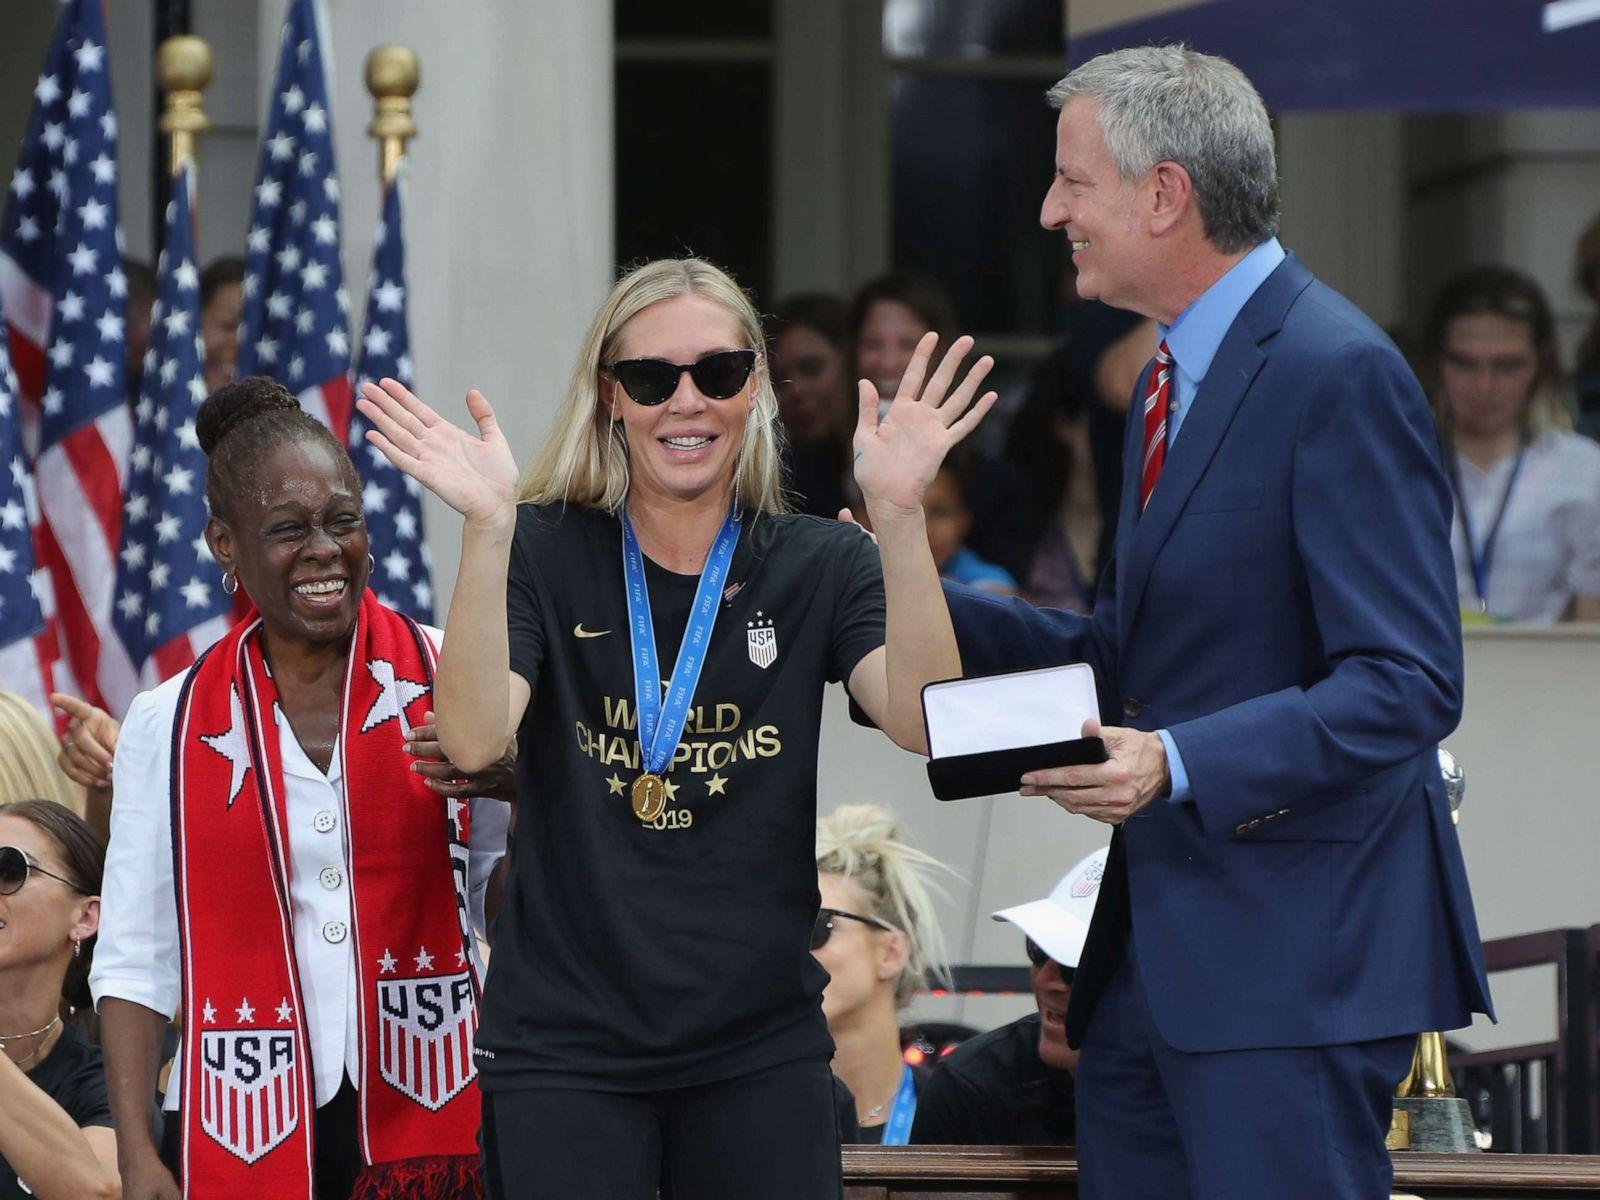 US women's soccer player Allie Long has wedding ring, key to city